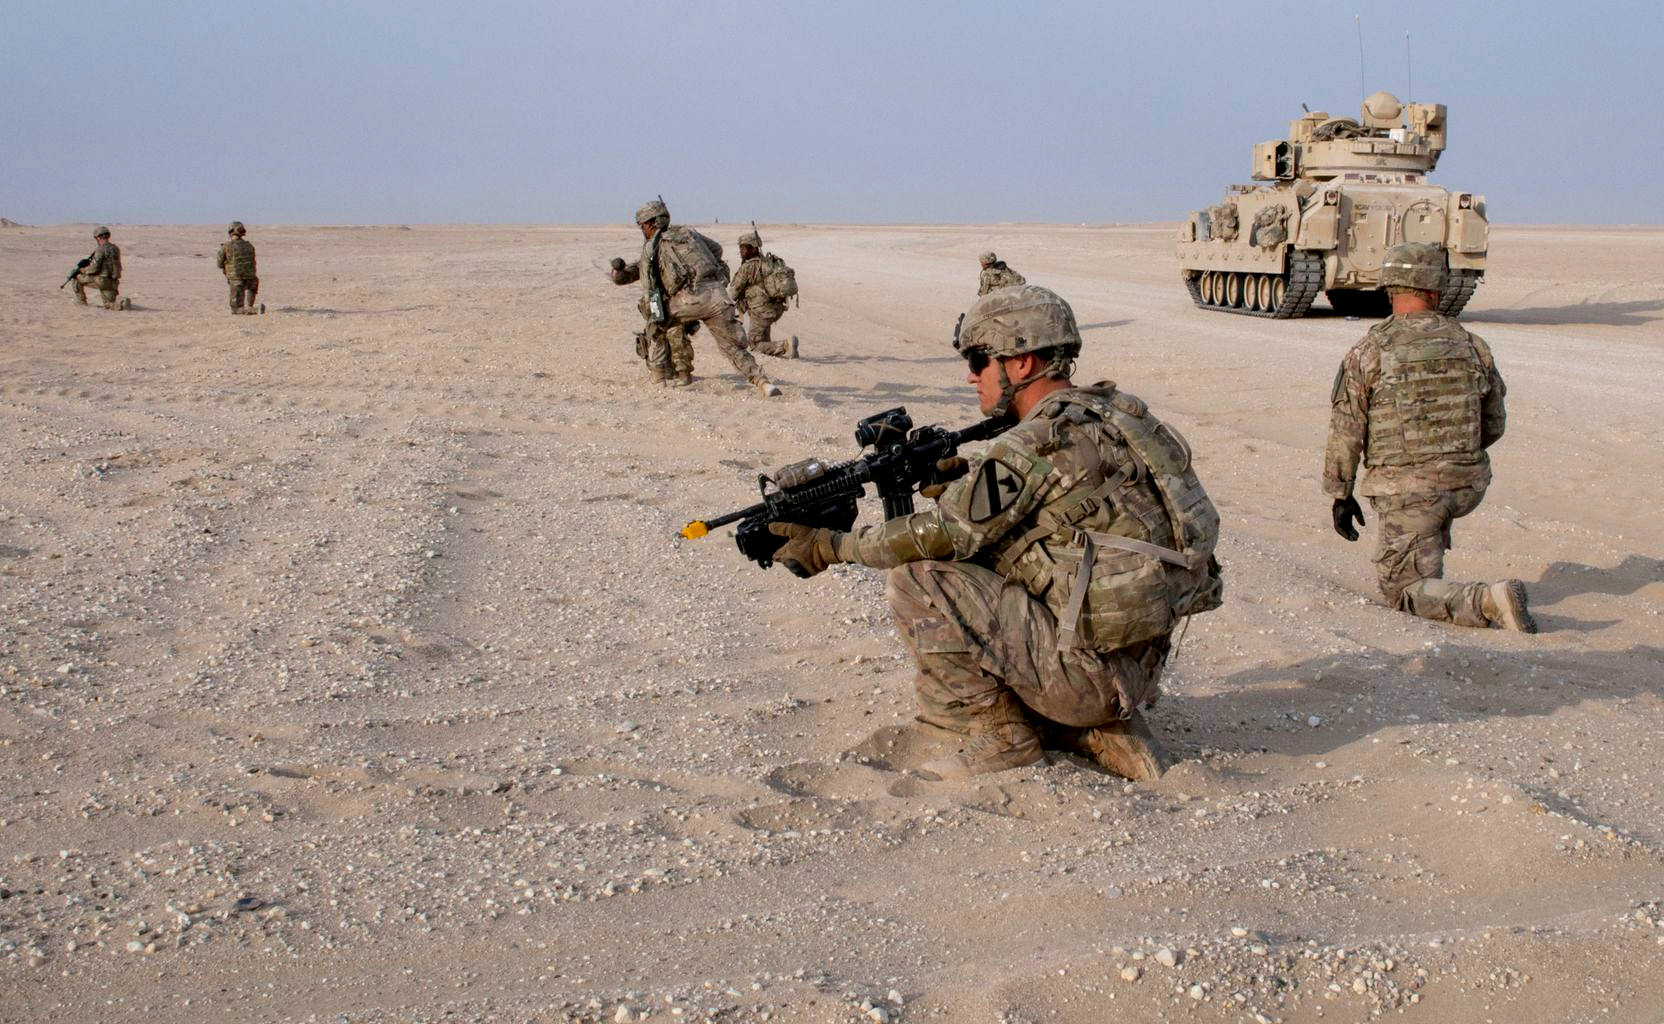 US army soldiers at risk